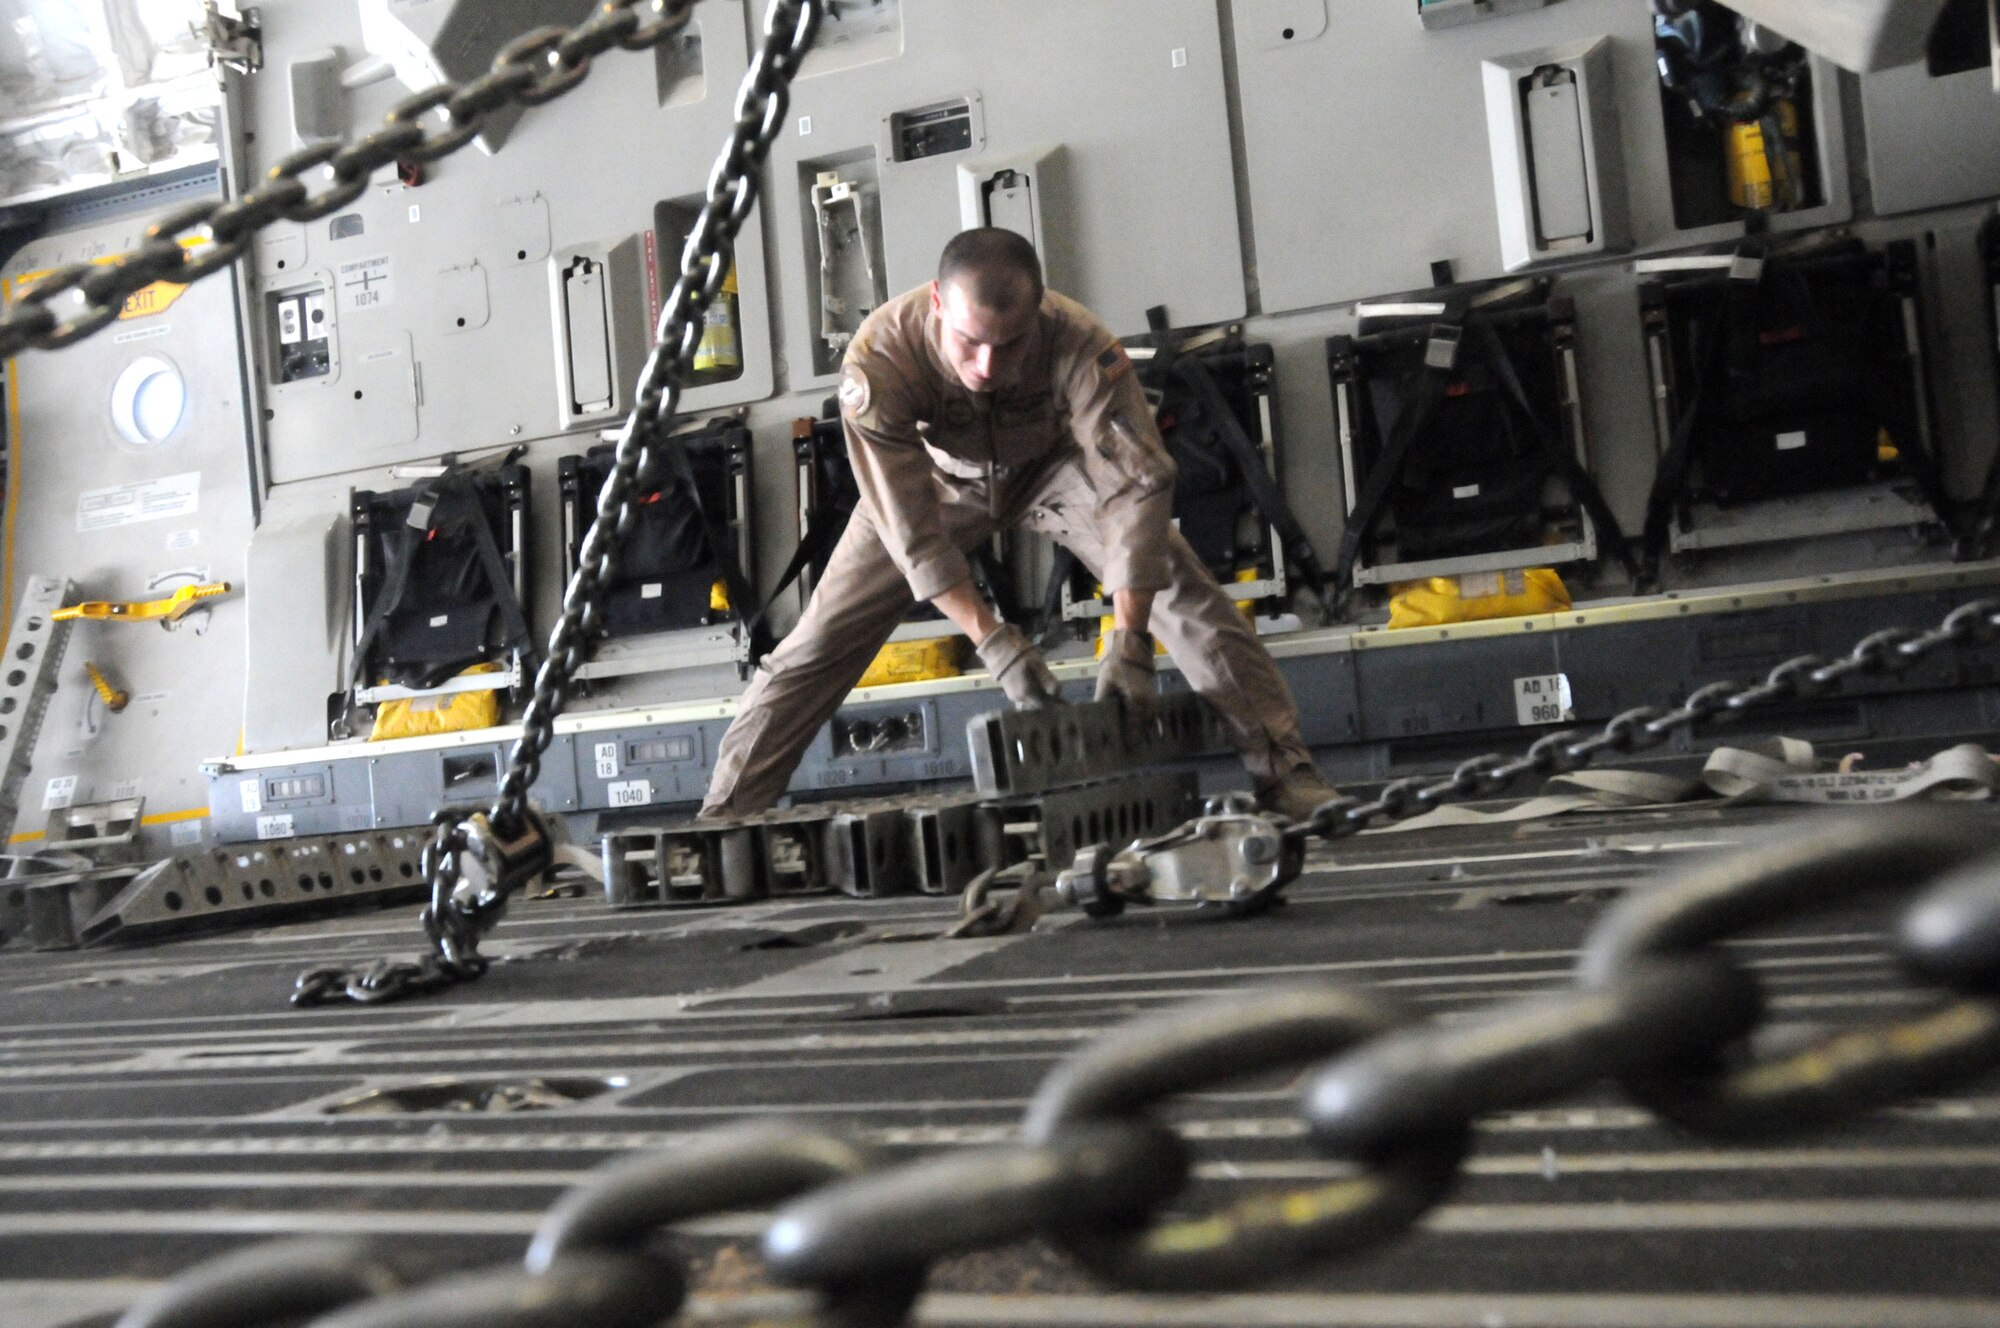 SOUTHWEST ASIA-Staff Sgt. Jason Harmon, 816th Expeditionary Airlift Squadron loadmaster stack rollers prior to securing it to the C-17s deck, at Bagram Air Base, Afghanistan June 19. Sergeant Harmond ensures that supplies being airlifted are distributed evenly in the cargo hull.(U.S. Air Force photo/ Senior Airman Tong Duong)